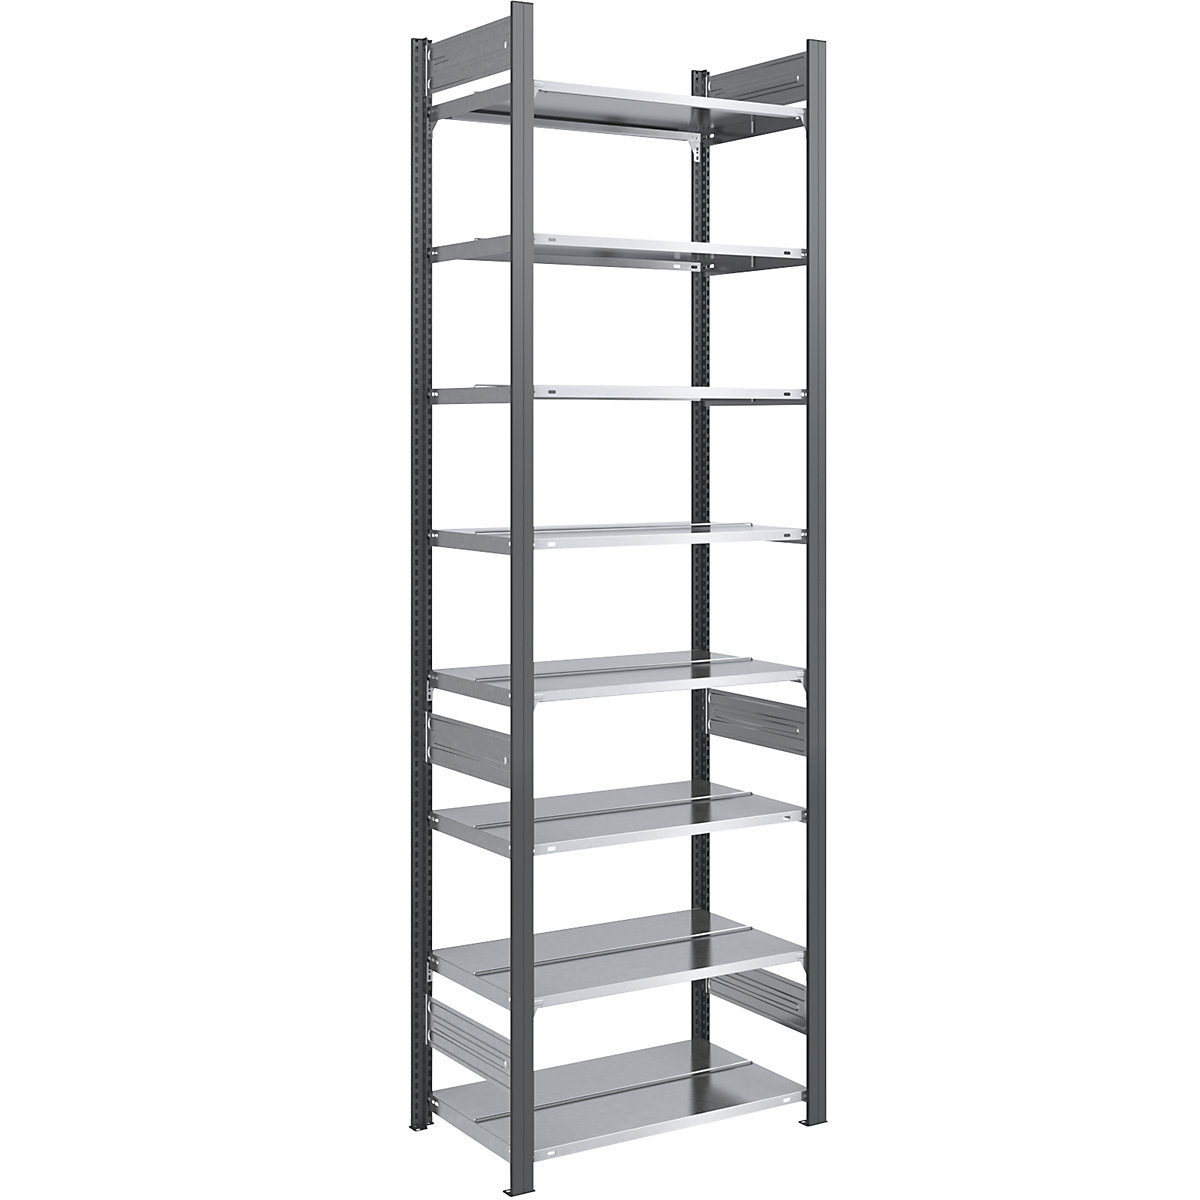 Boltless Archive Shelving Double Sided, Narrow Width Shelving Units